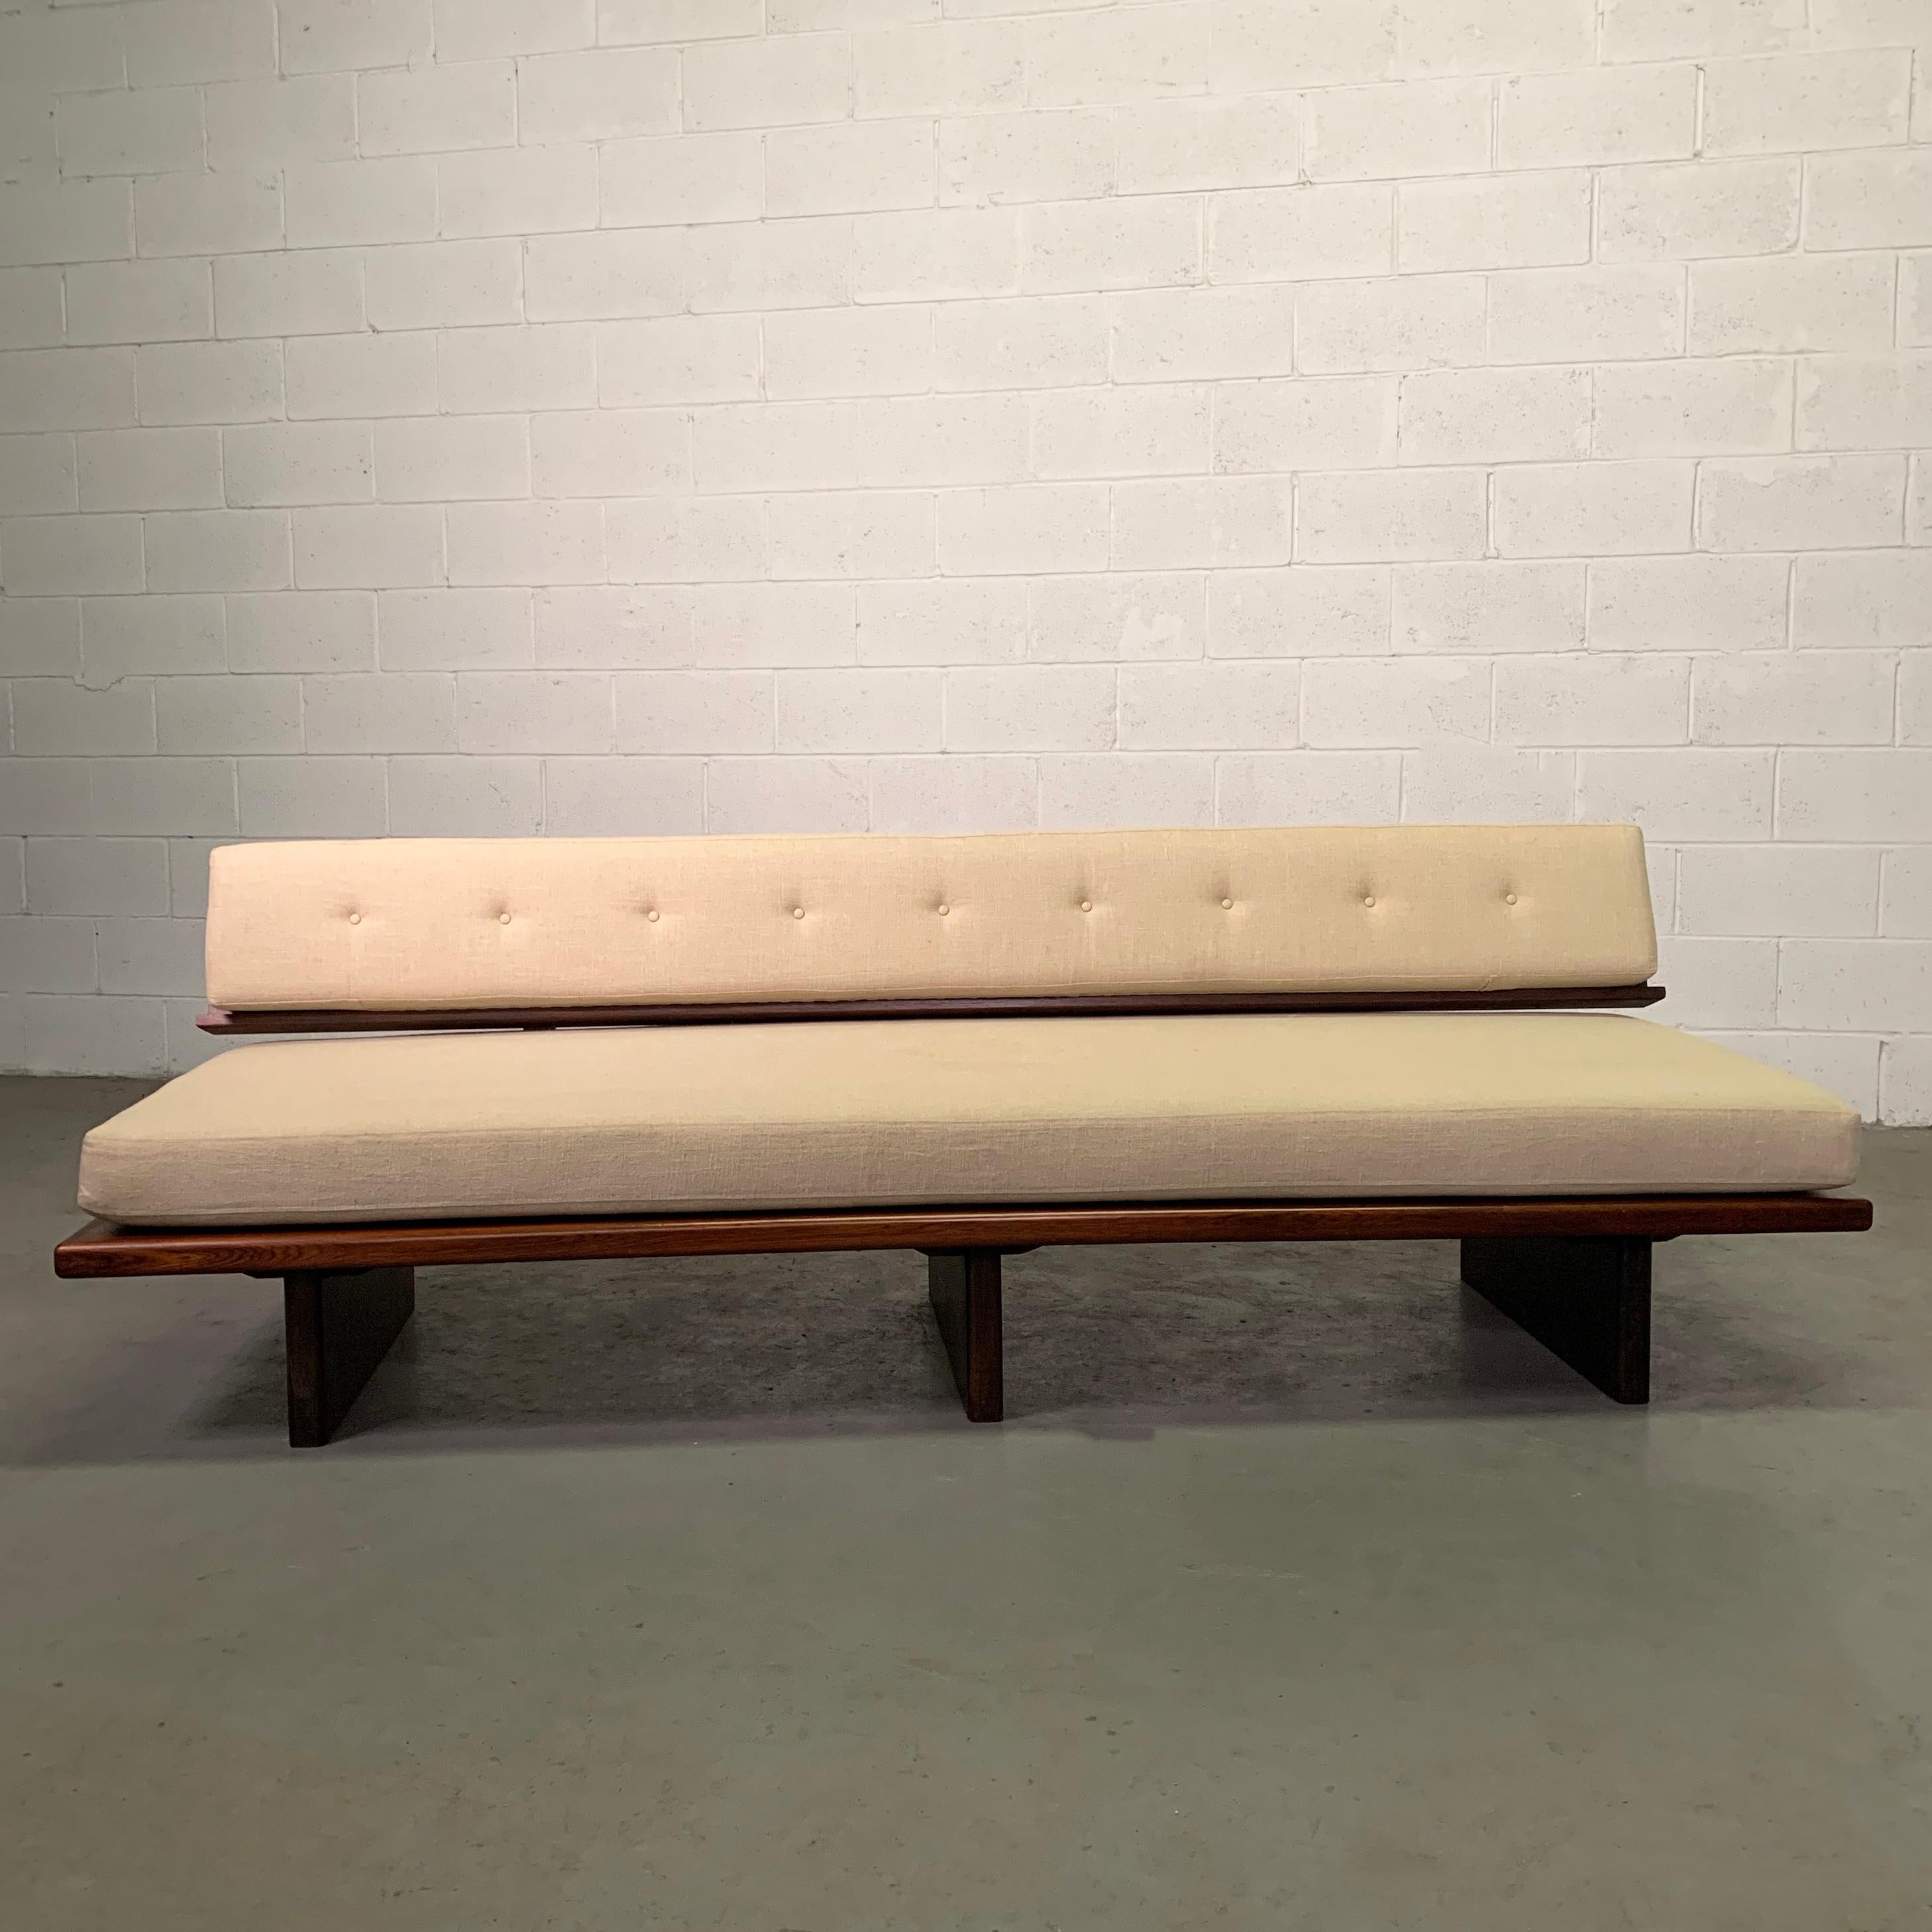 Mid-Century Modern, Brazilian sofa or daybed features a rosewood platform base with a floating back connected by steel brackets is newly upholstered in oatmeal beige linen. This sofa is gorgeous from all angles. 